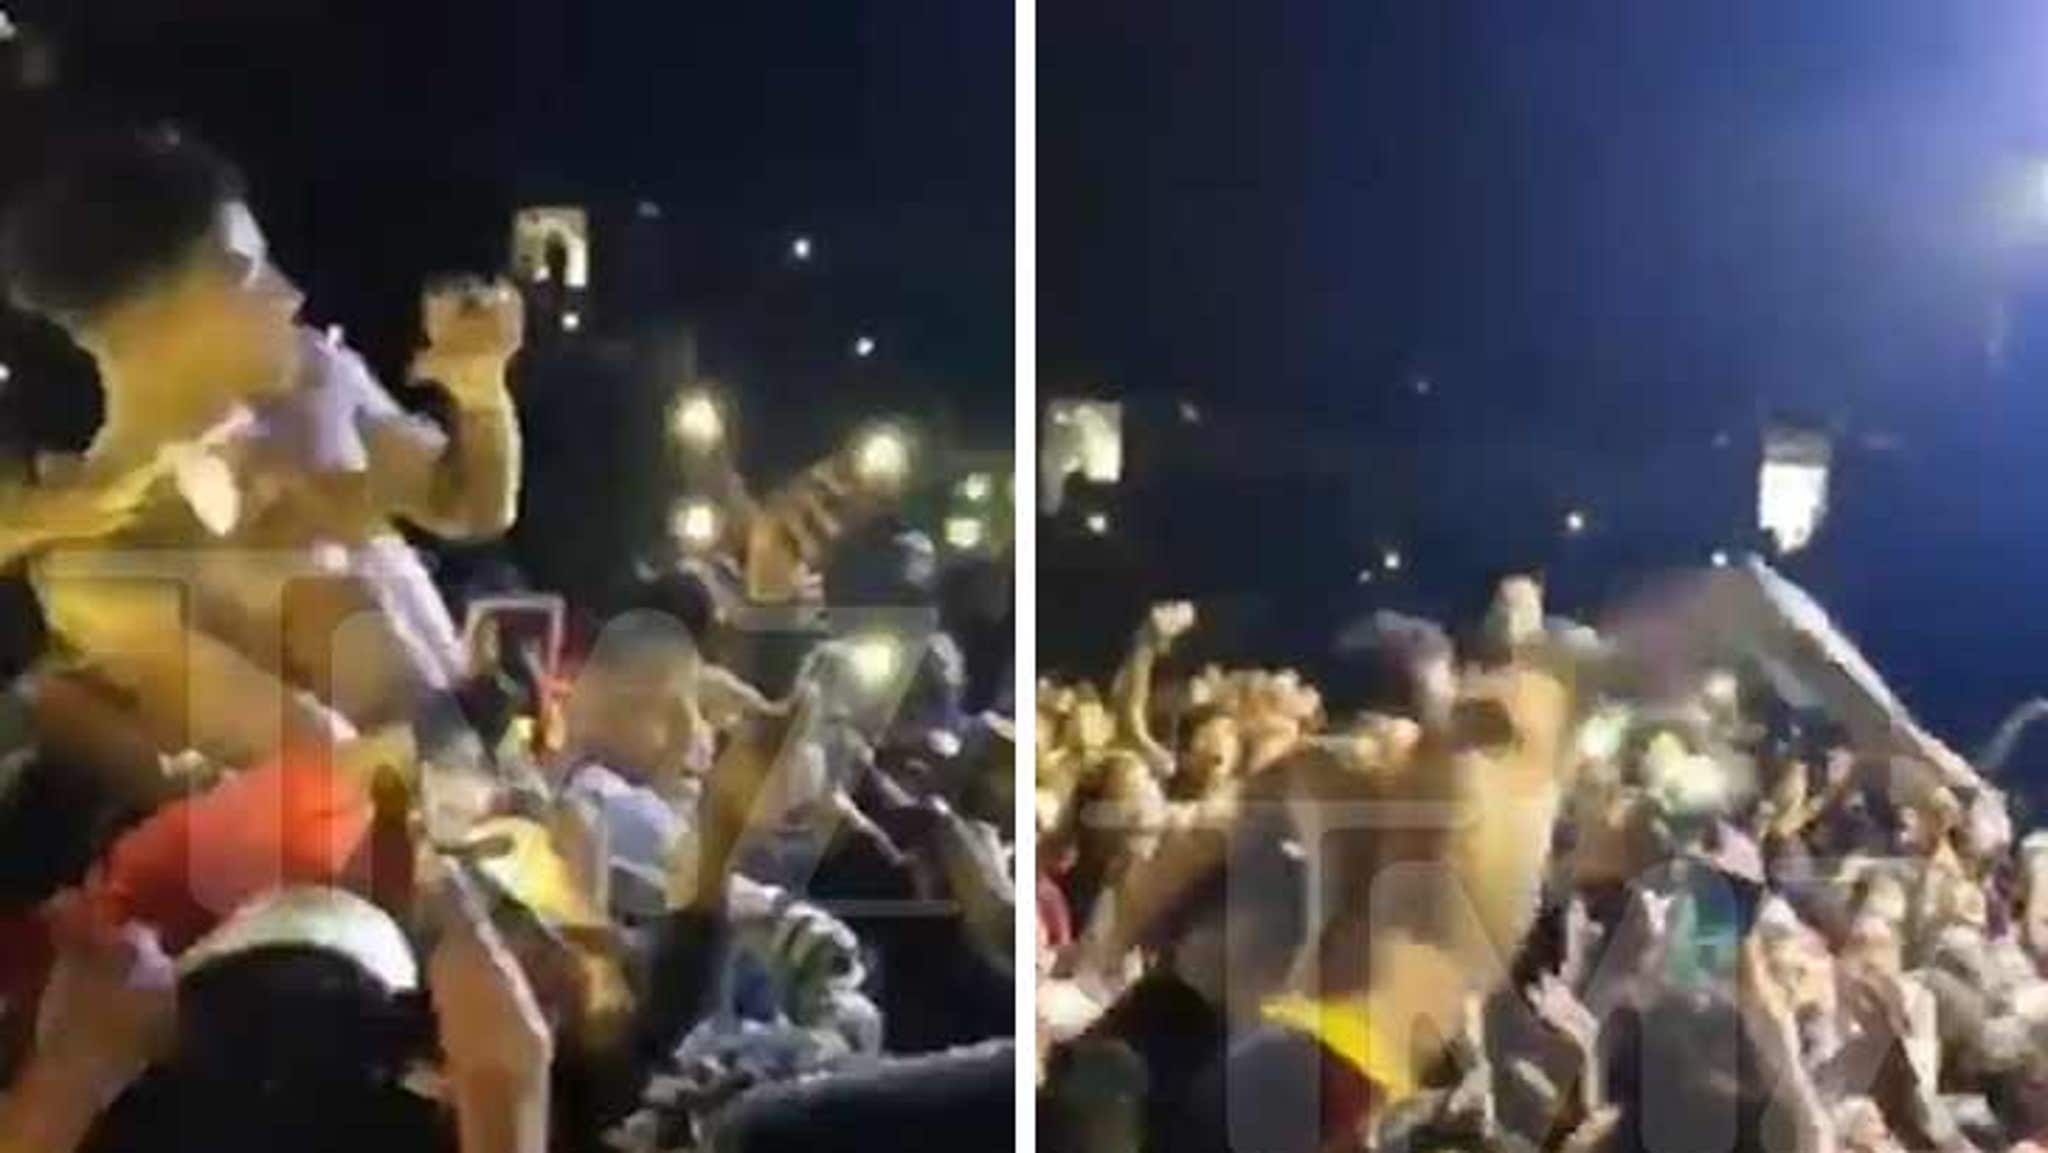 NBA YoungBoy Concert Erupts in Violence After Heckler Tried Stealing